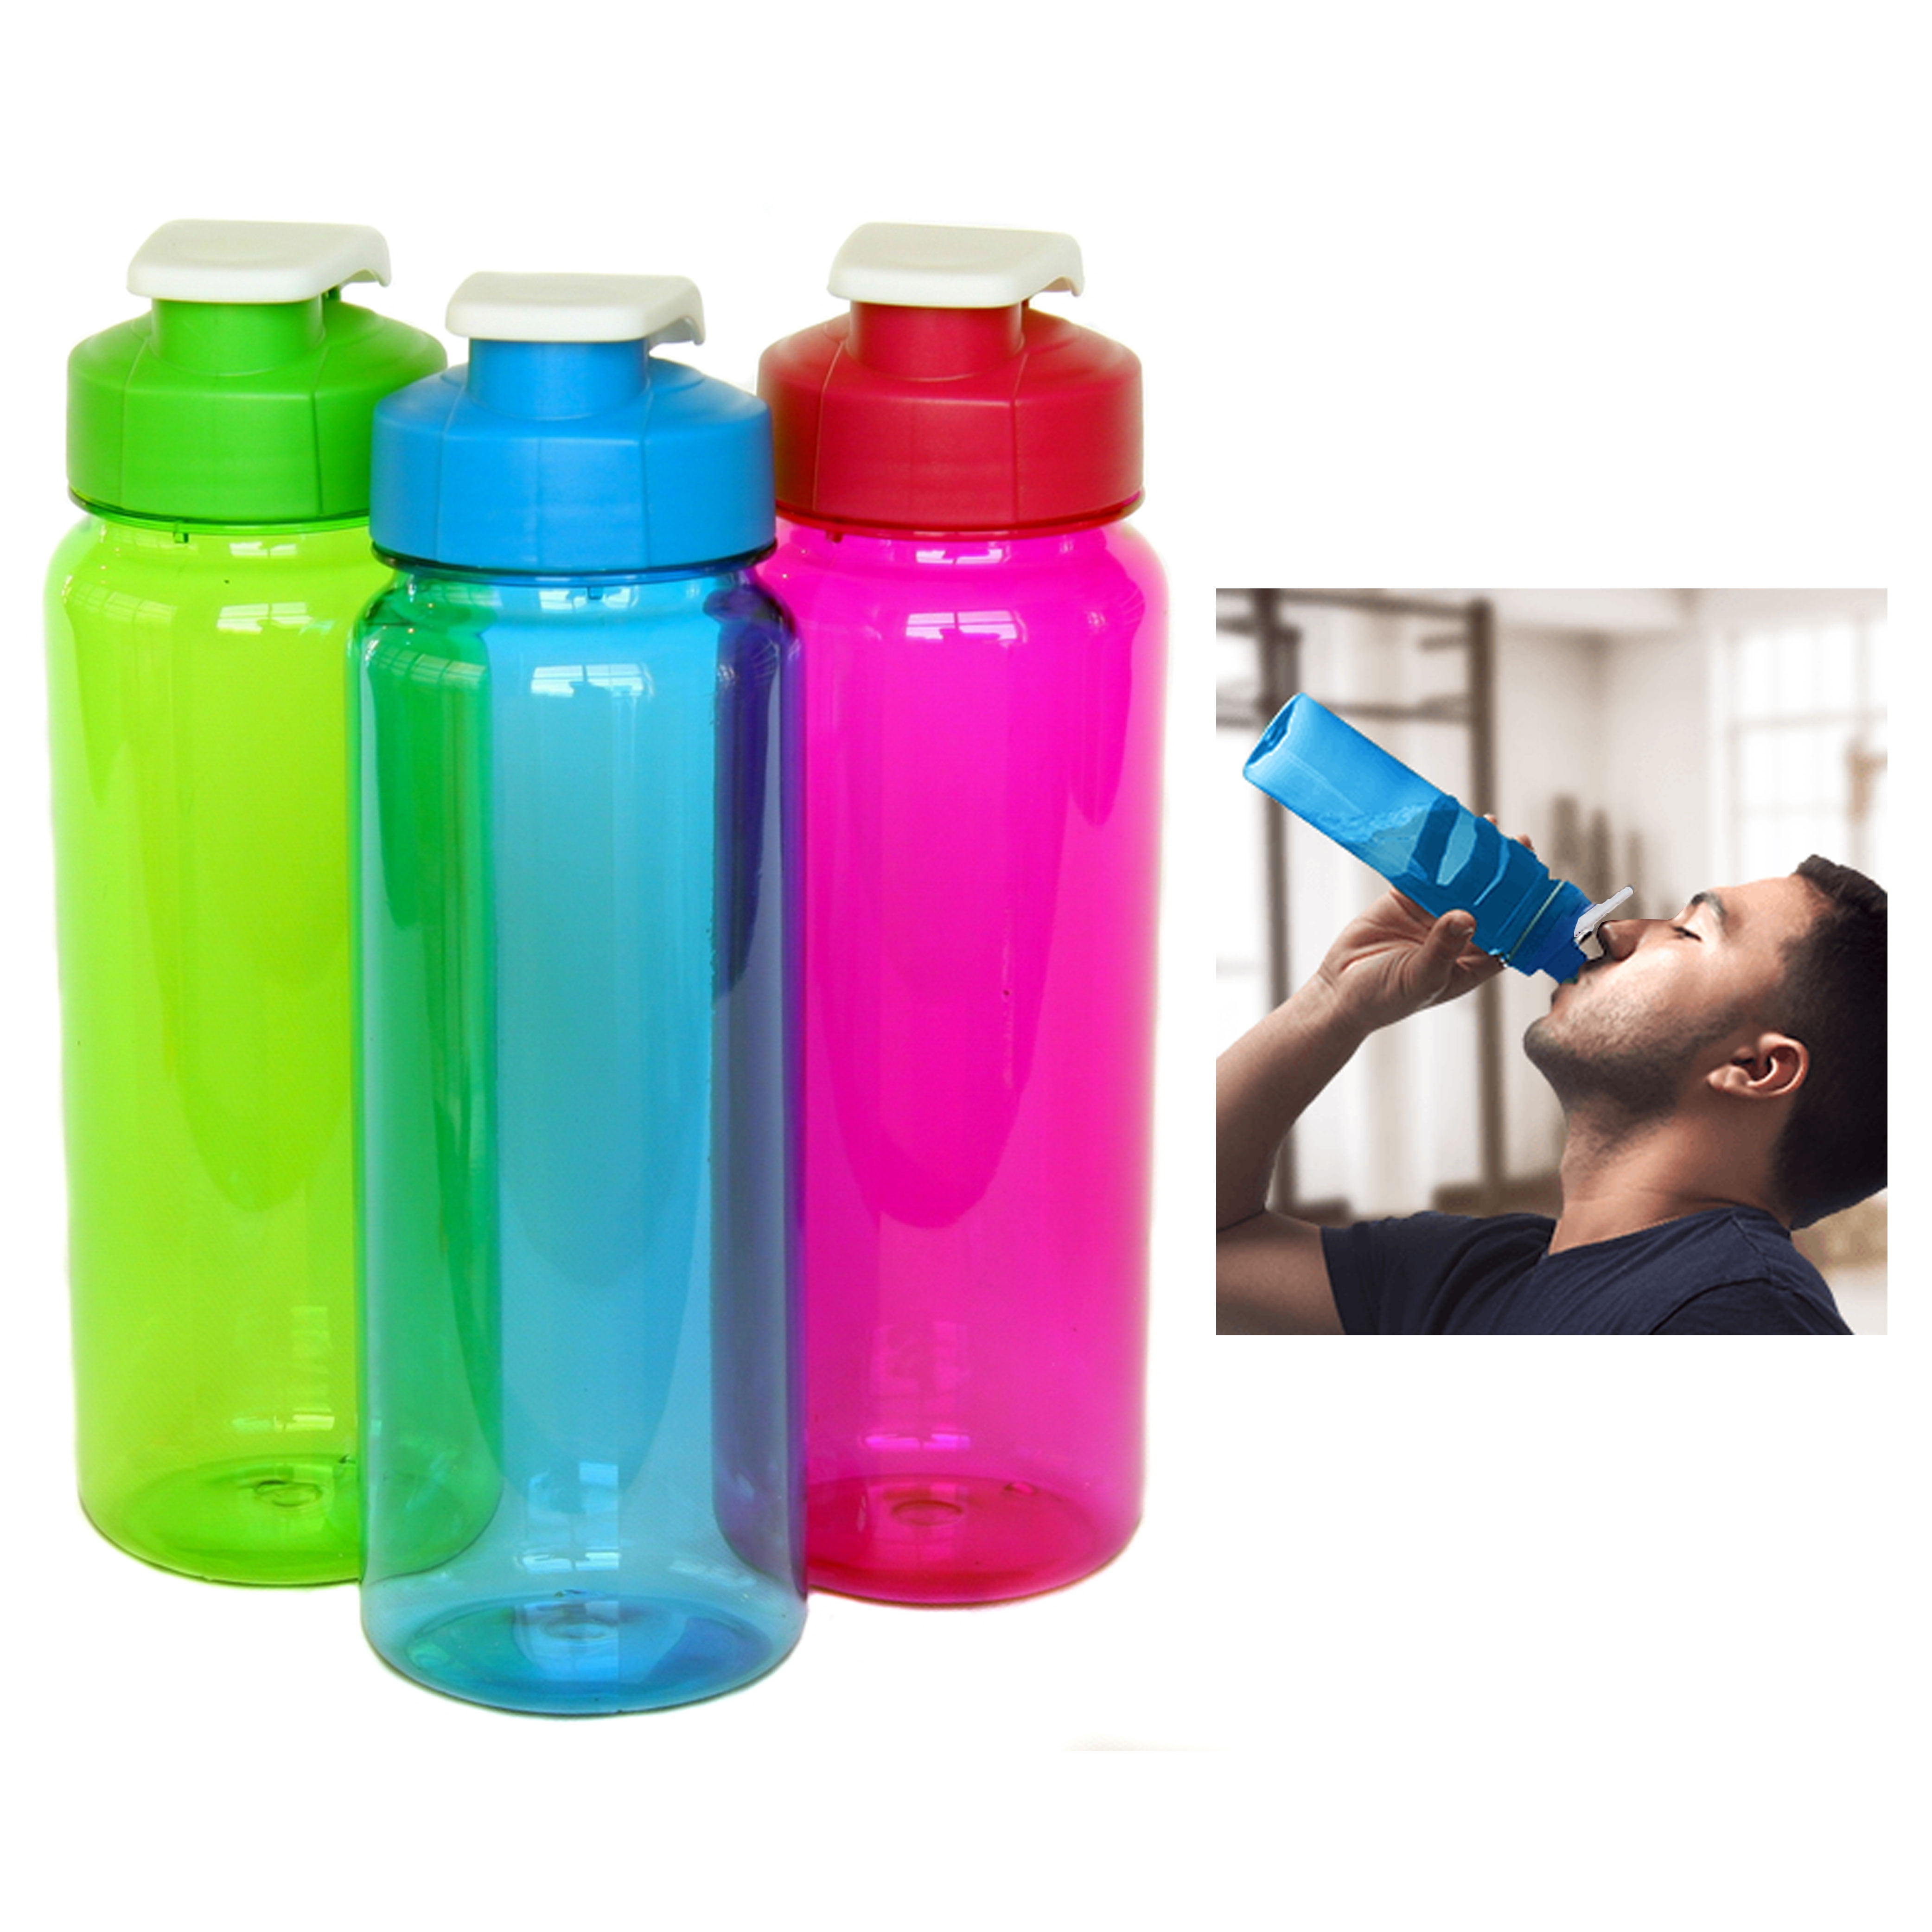 TOOFEEL 2.2 Liter / 74 oz Big Water Bottle, Girl's Healthy Gift Gym Water  bottles for Women with Cle…See more TOOFEEL 2.2 Liter / 74 oz Big Water